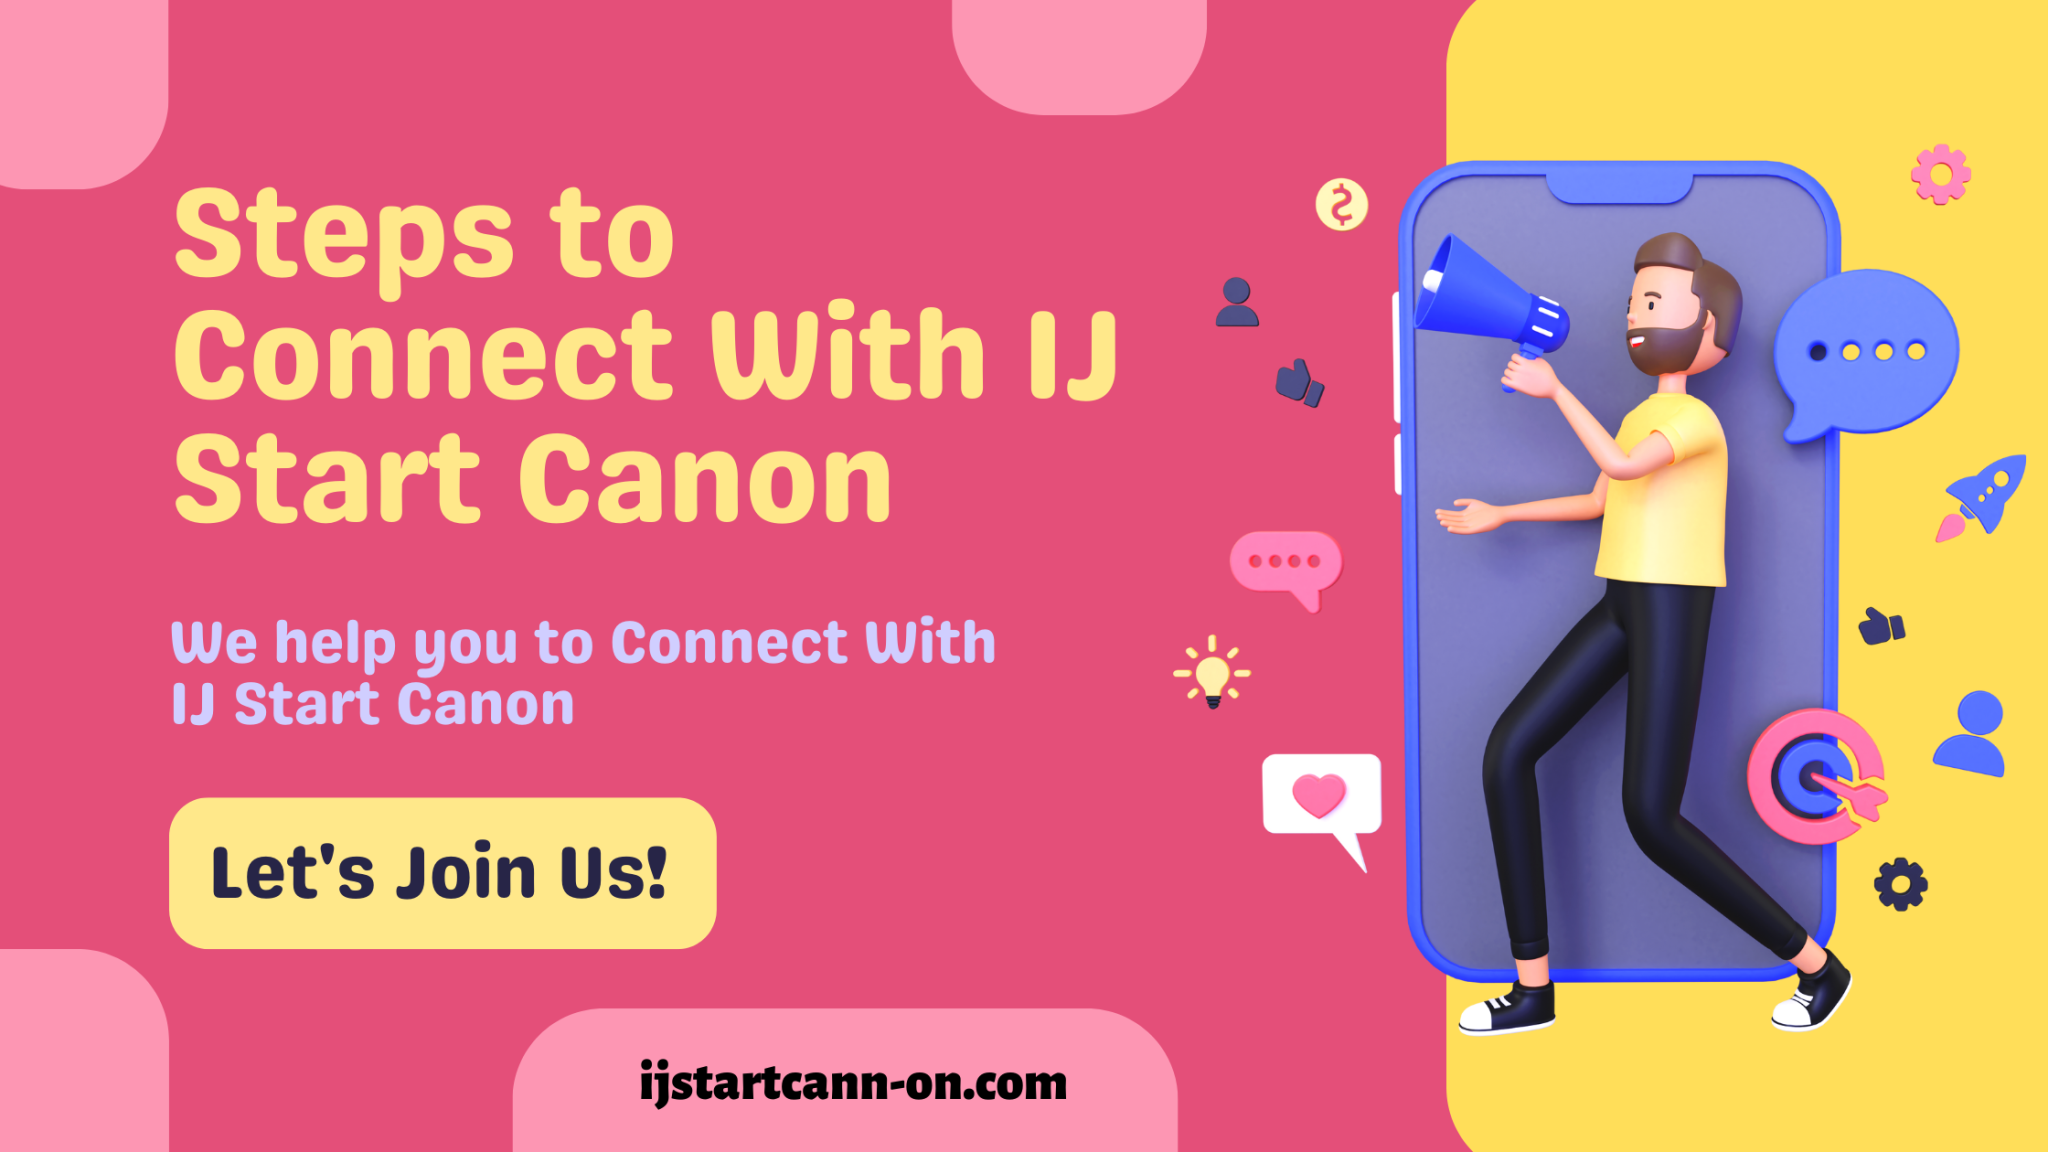 The connect is starting starts. IJ.start.Canon.